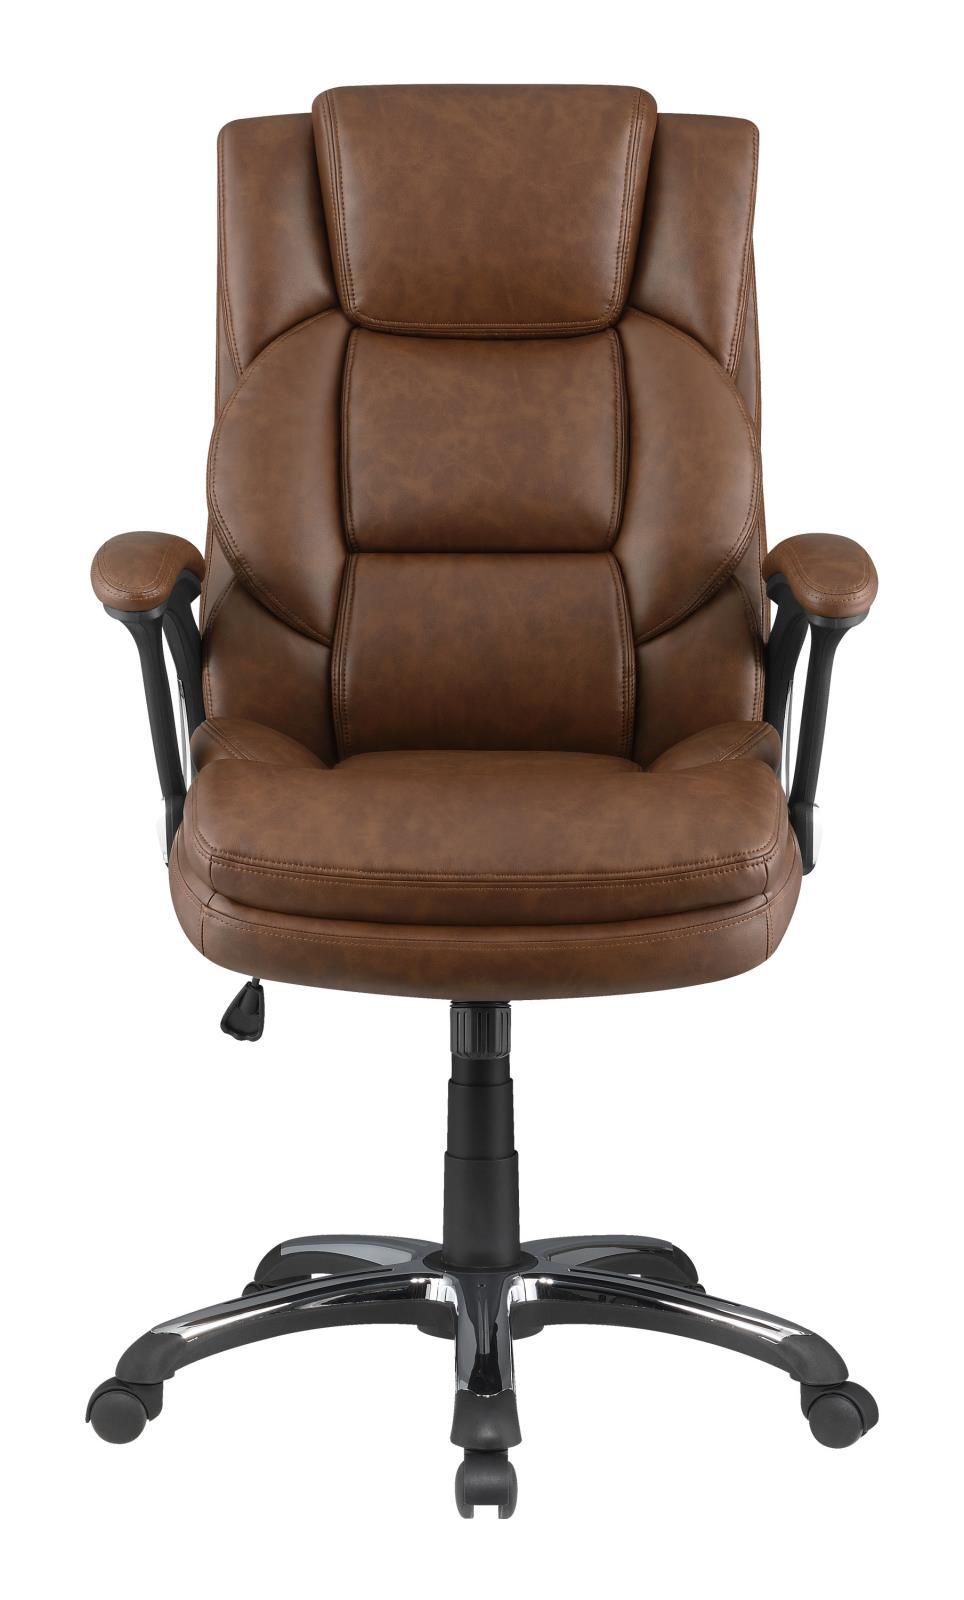 Nerris Adjustable Height Office Chair with Padded Arm Brown and Black Nerris Adjustable Height Office Chair with Padded Arm Brown and Black Half Price Furniture